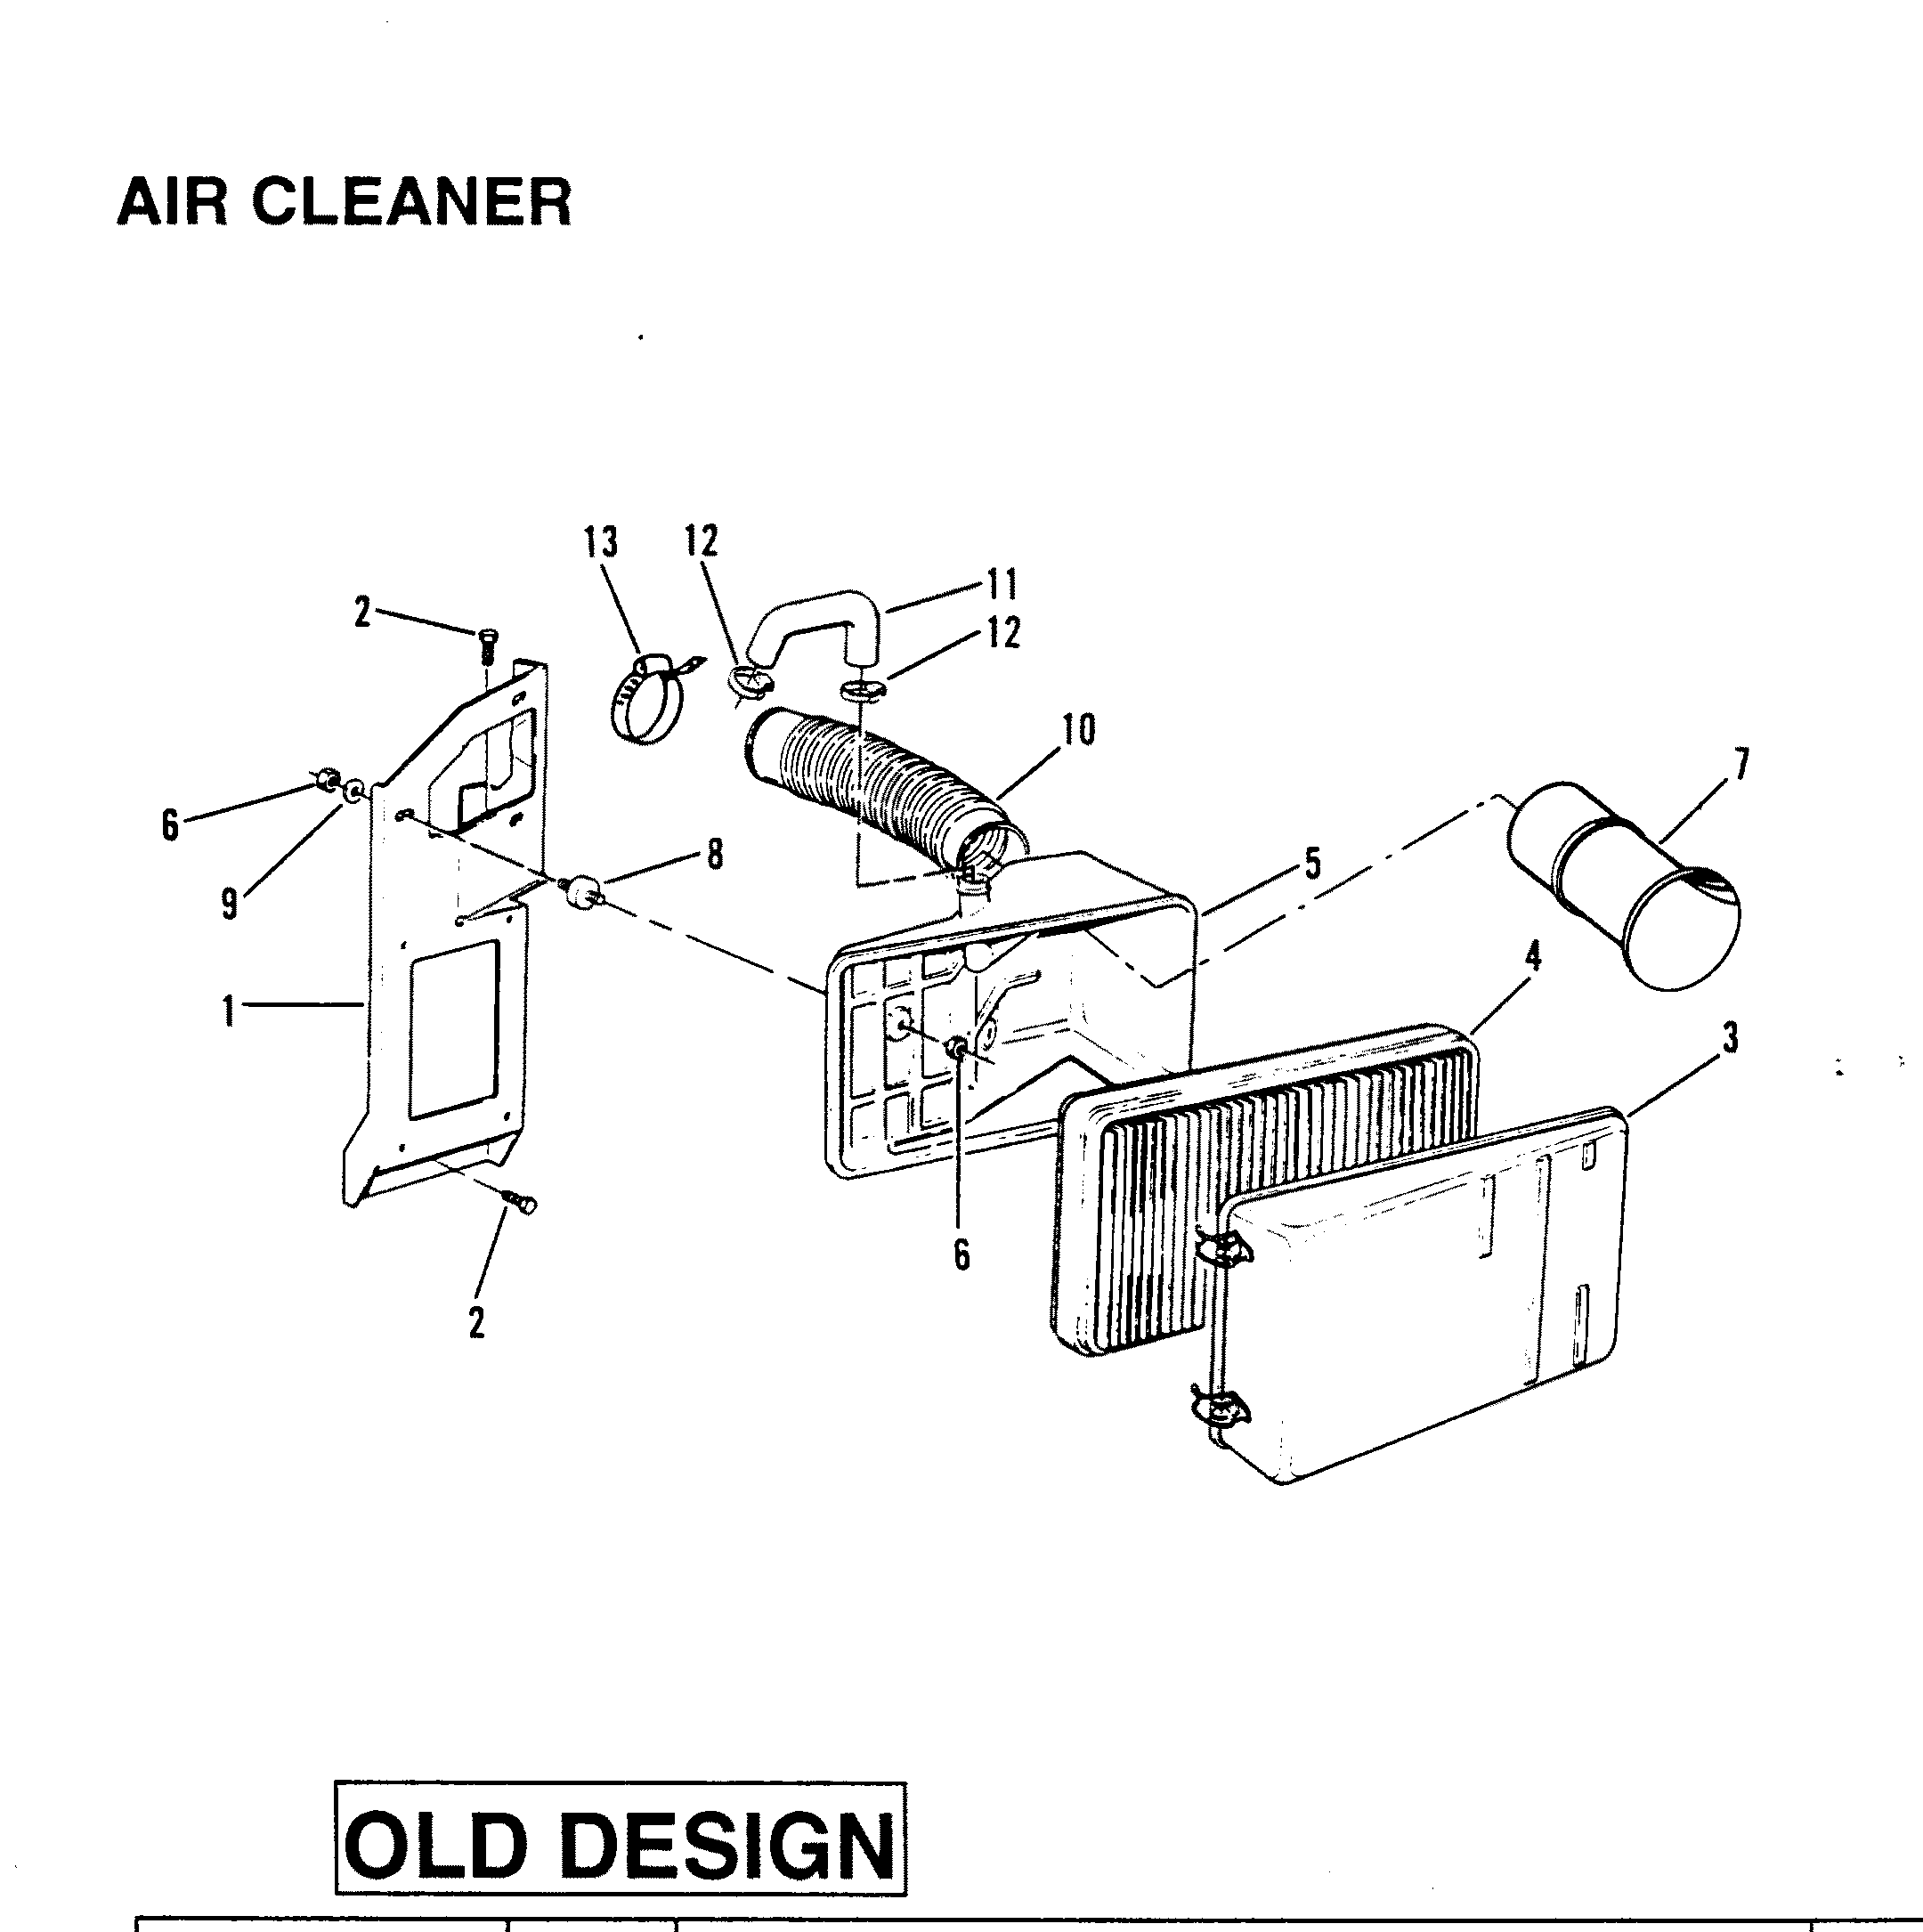 AIR CLEANER (OLD DESIGN)